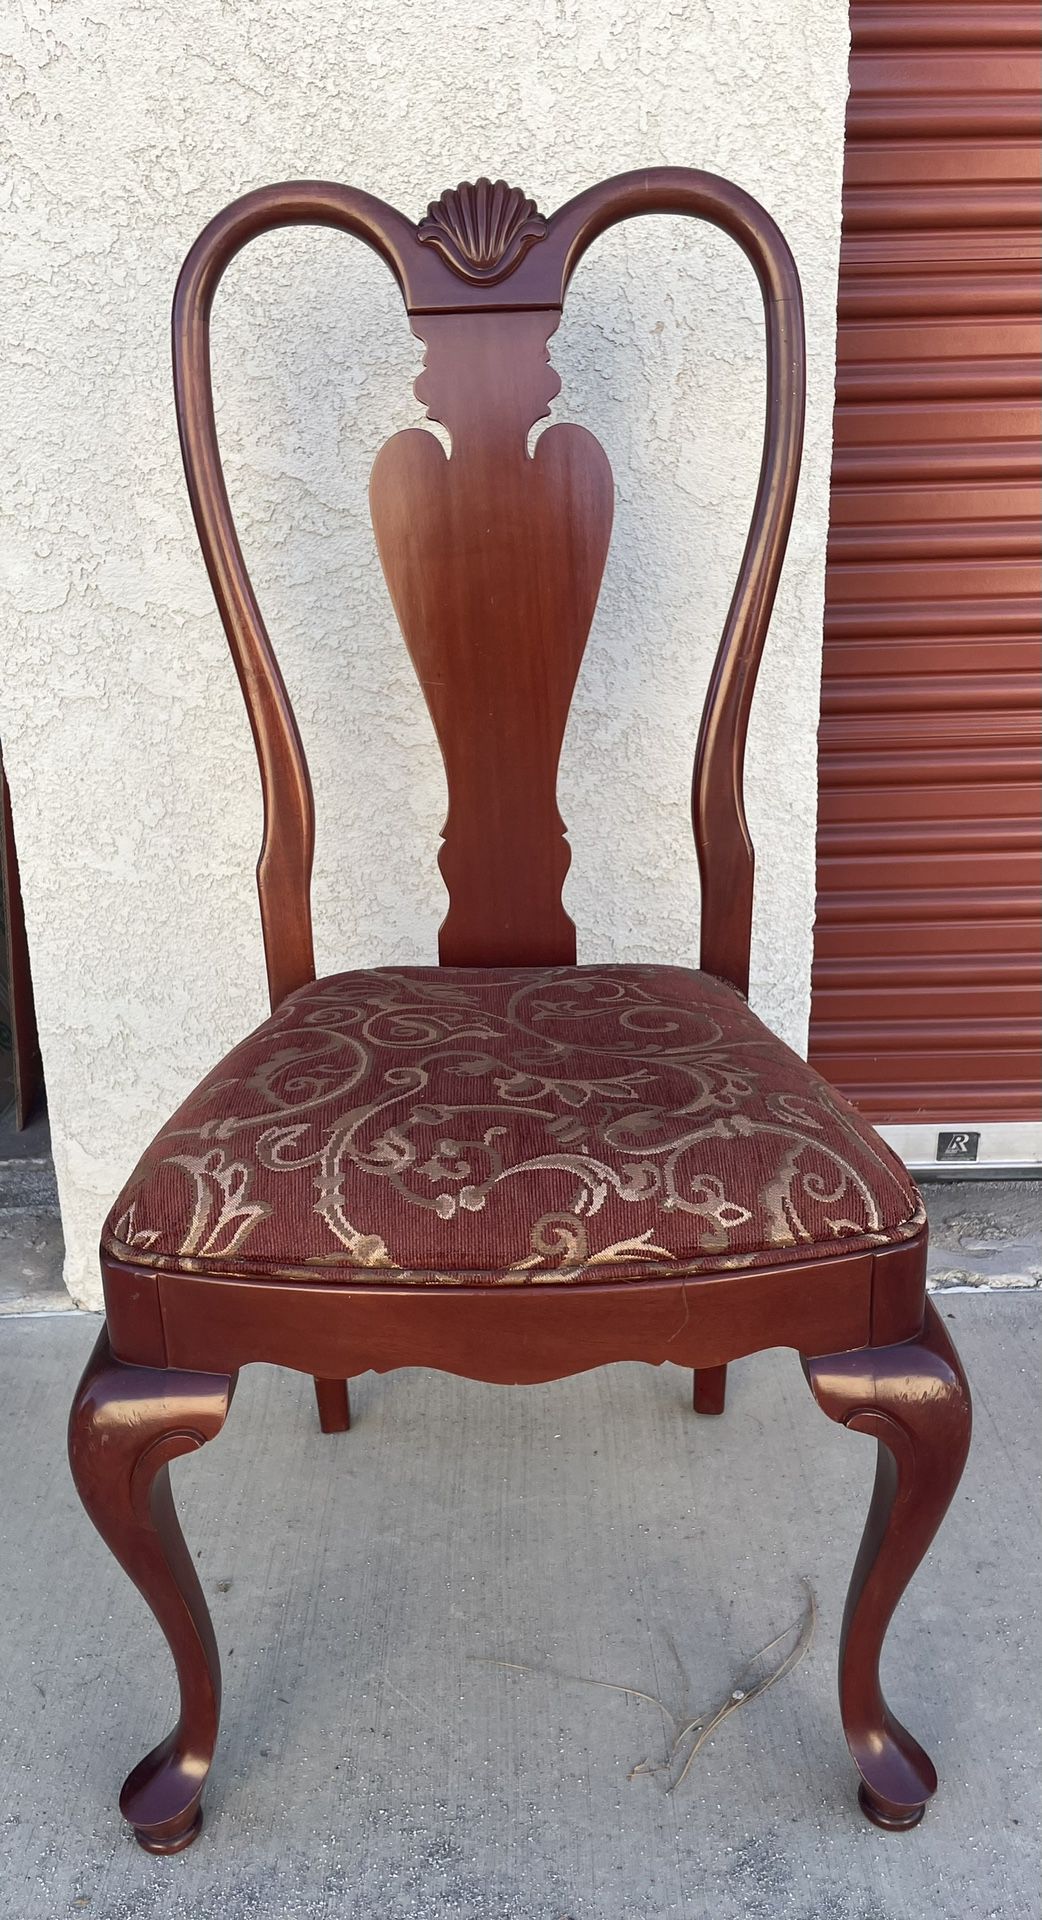 Mahogany Dining Chairs  $30/ Chair